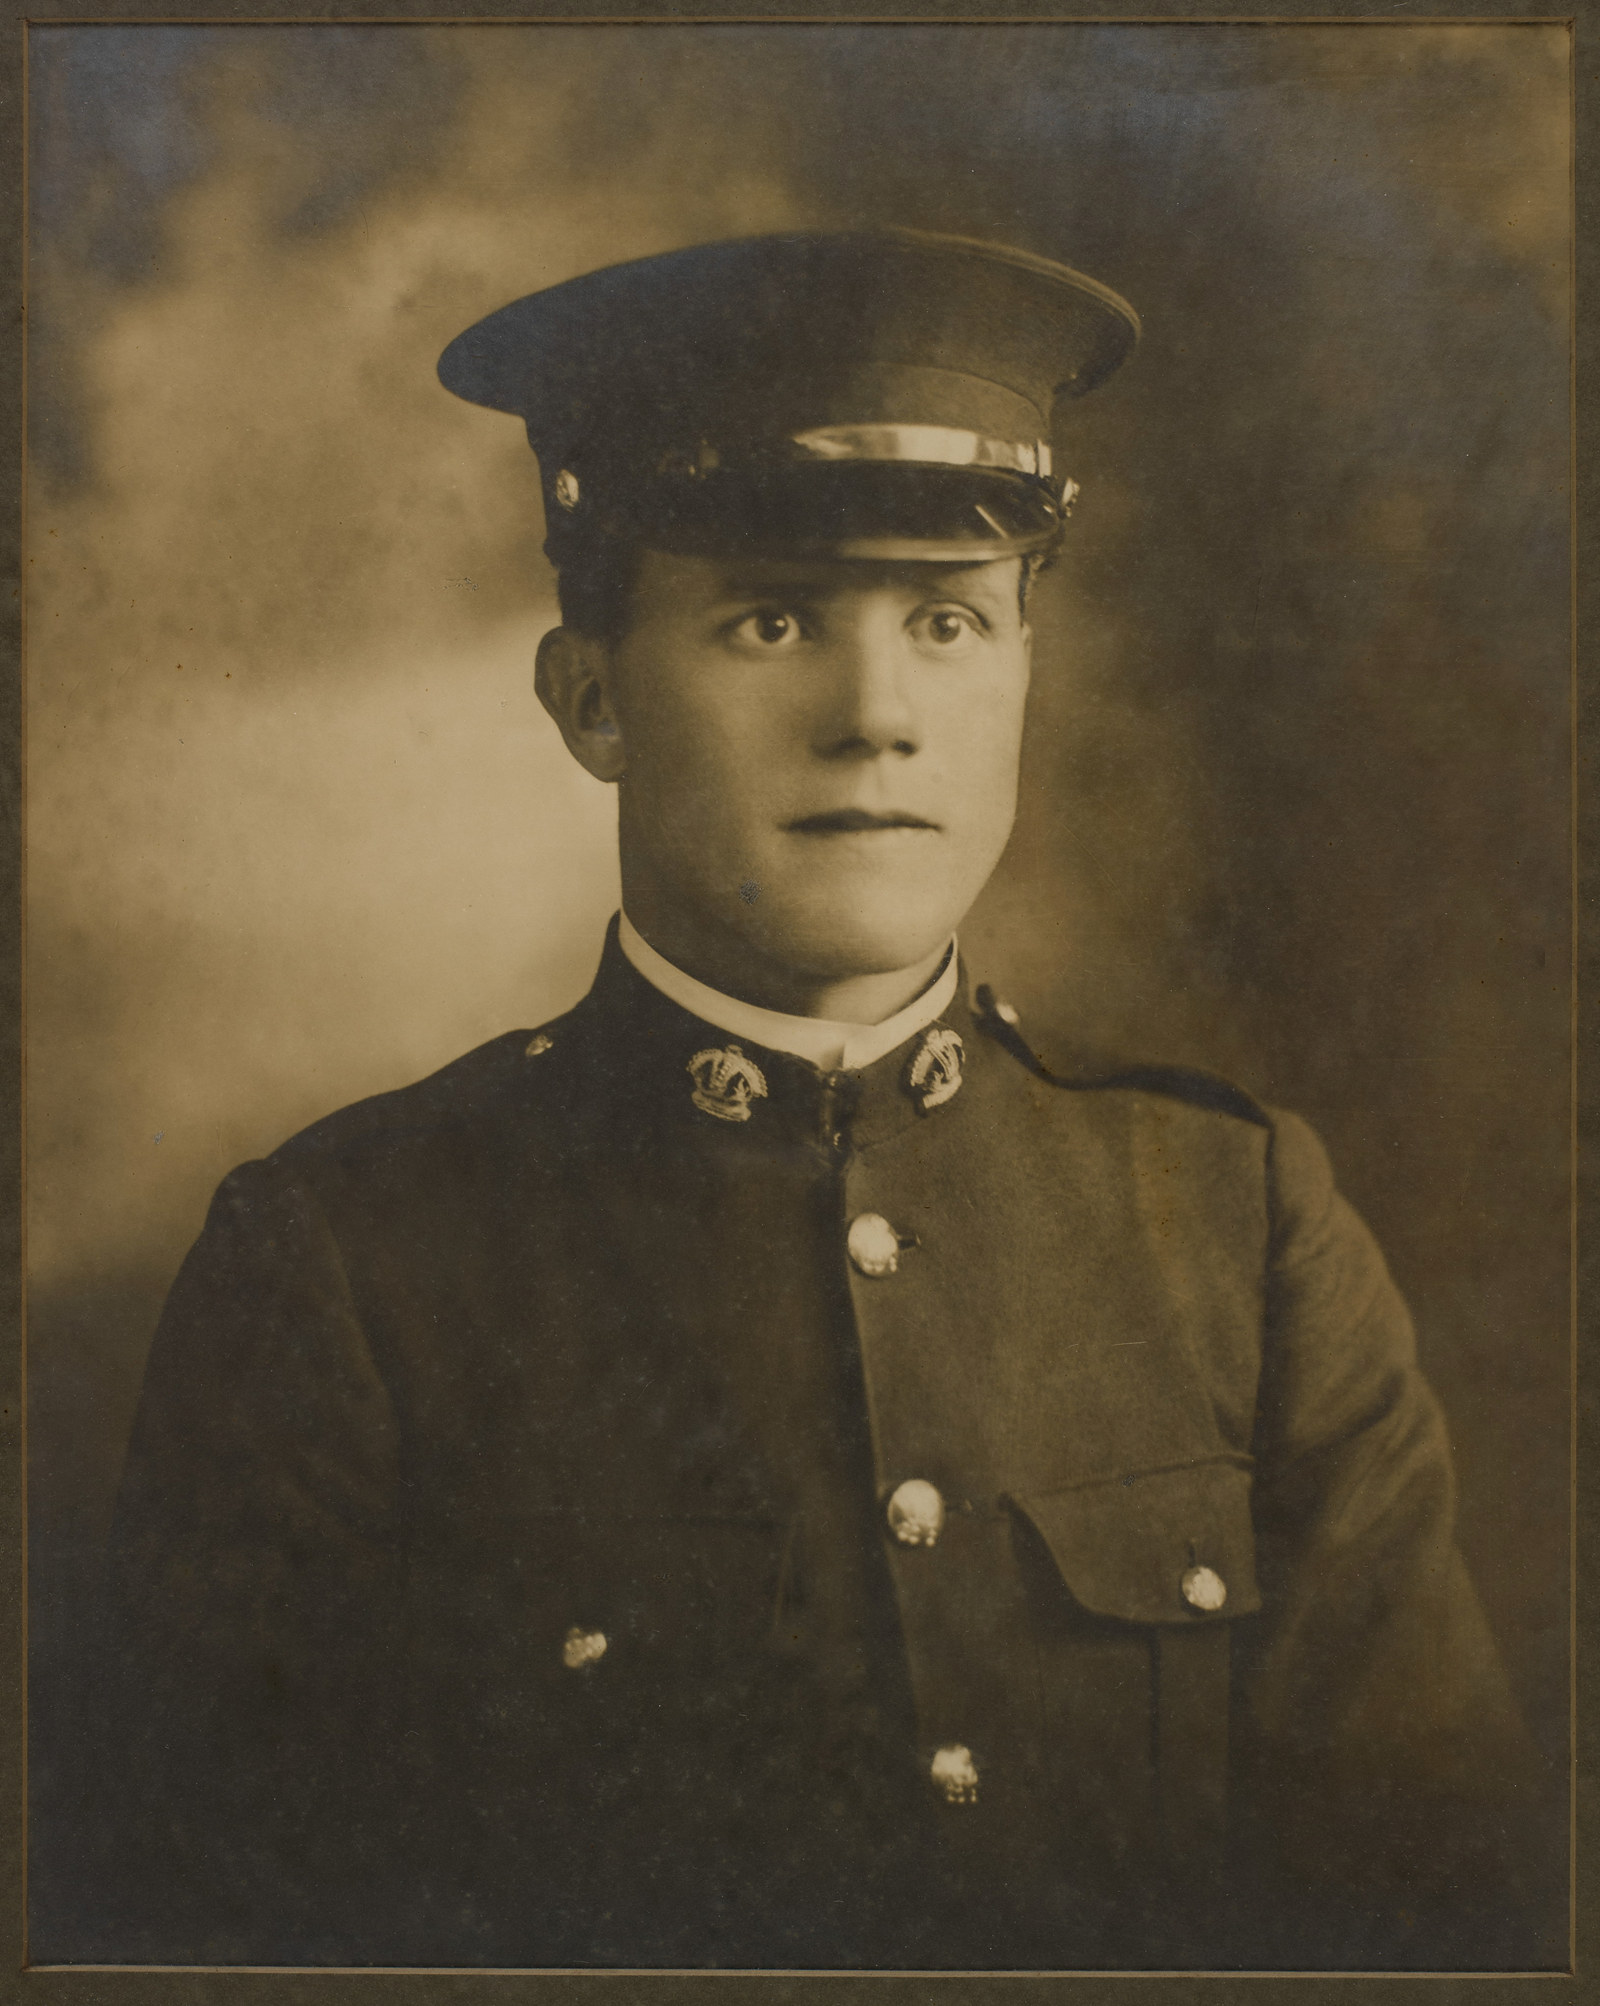 Framed portrait (detail)  photograph of Daniel Alfred Charles Clifford, watchman at Sydney from 1915-1923